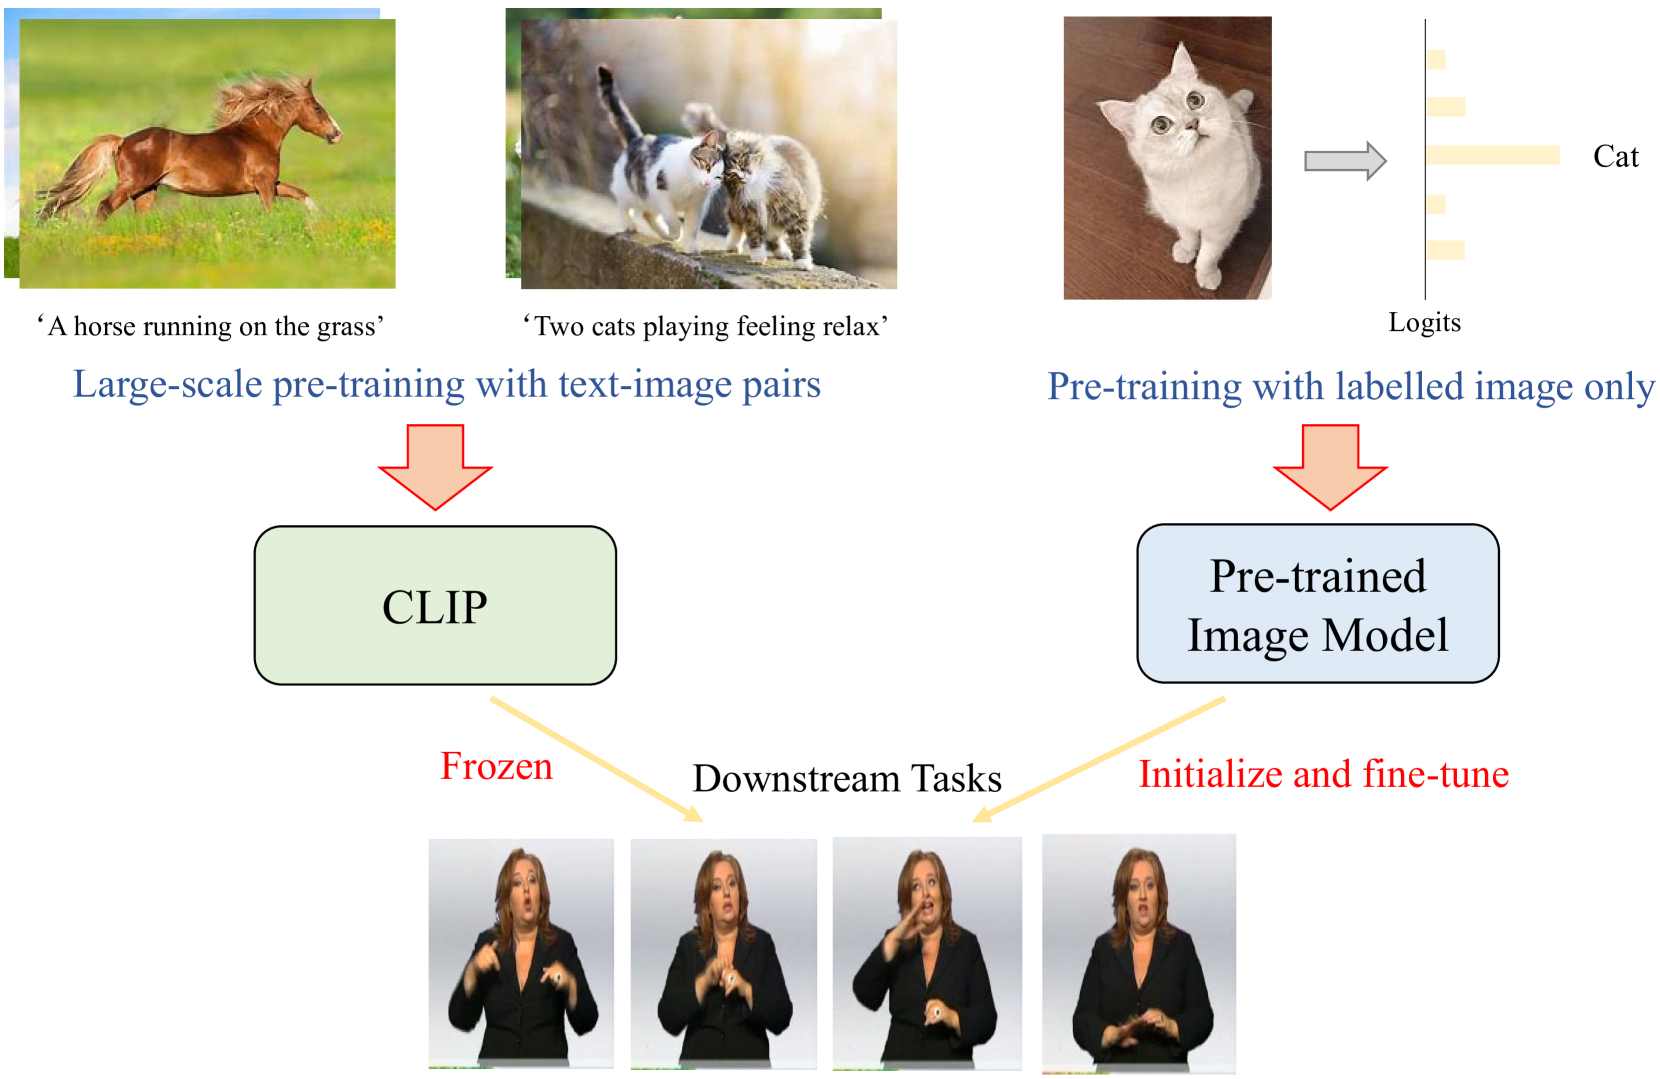 Improving Continuous Sign Language Recognition with Adapted Image Models